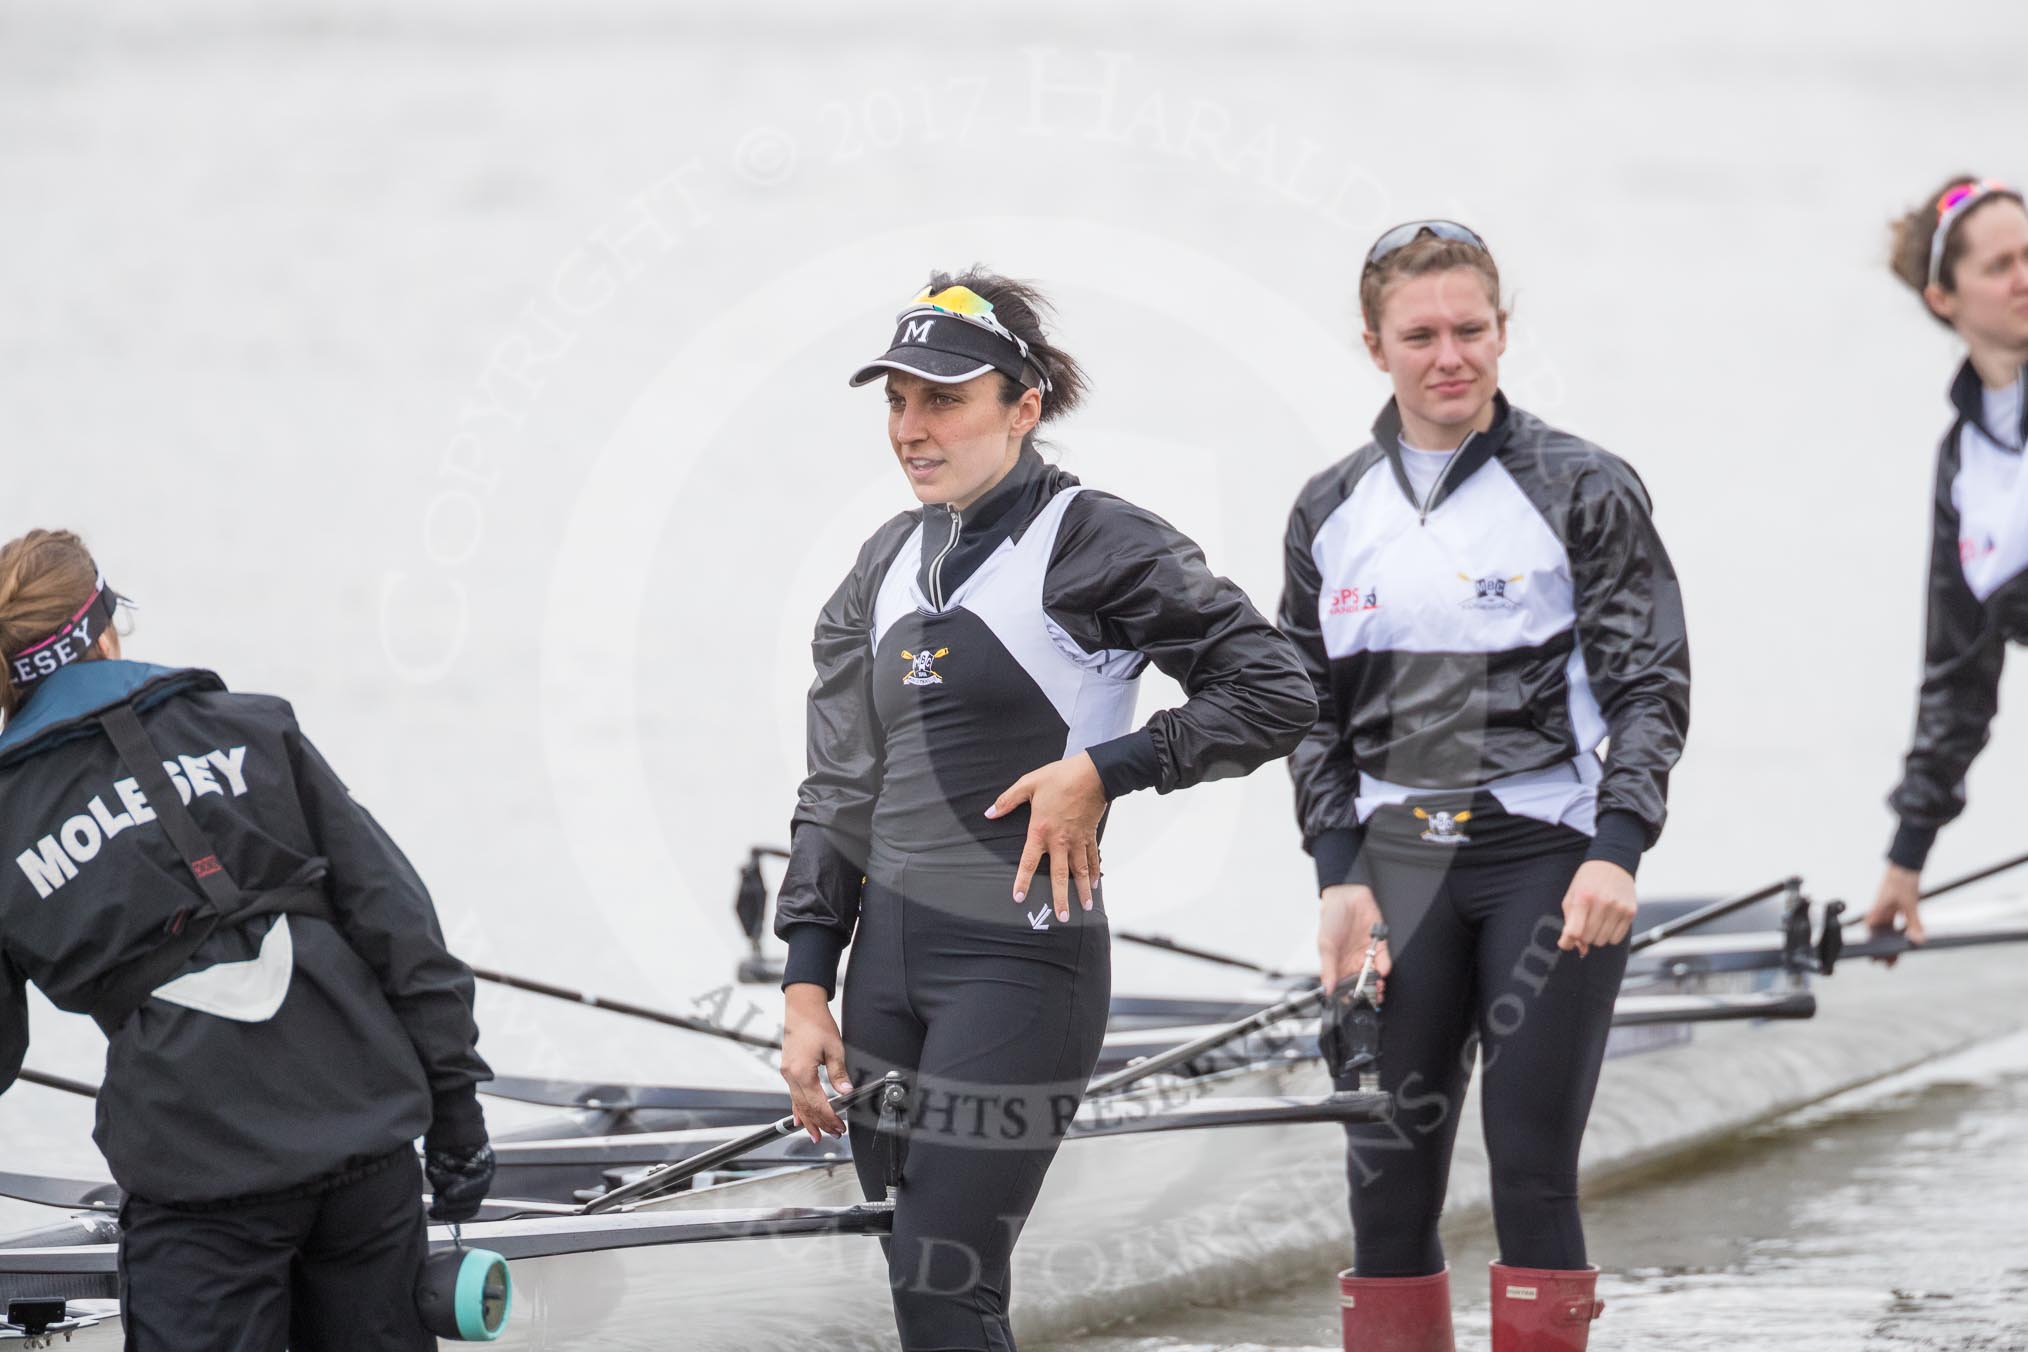 The Cancer Research UK Boat Race season 2017 - Women's Boat Race Fixture OUWBC vs Molesey BC: Molesey getting their boat ready - cox Anna Corderoy, 7 seat Gabriella Rodriguez, and 5 seat Katie Bartlett.
River Thames between Putney Bridge and Mortlake,
London SW15,

United Kingdom,
on 19 March 2017 at 15:25, image #25